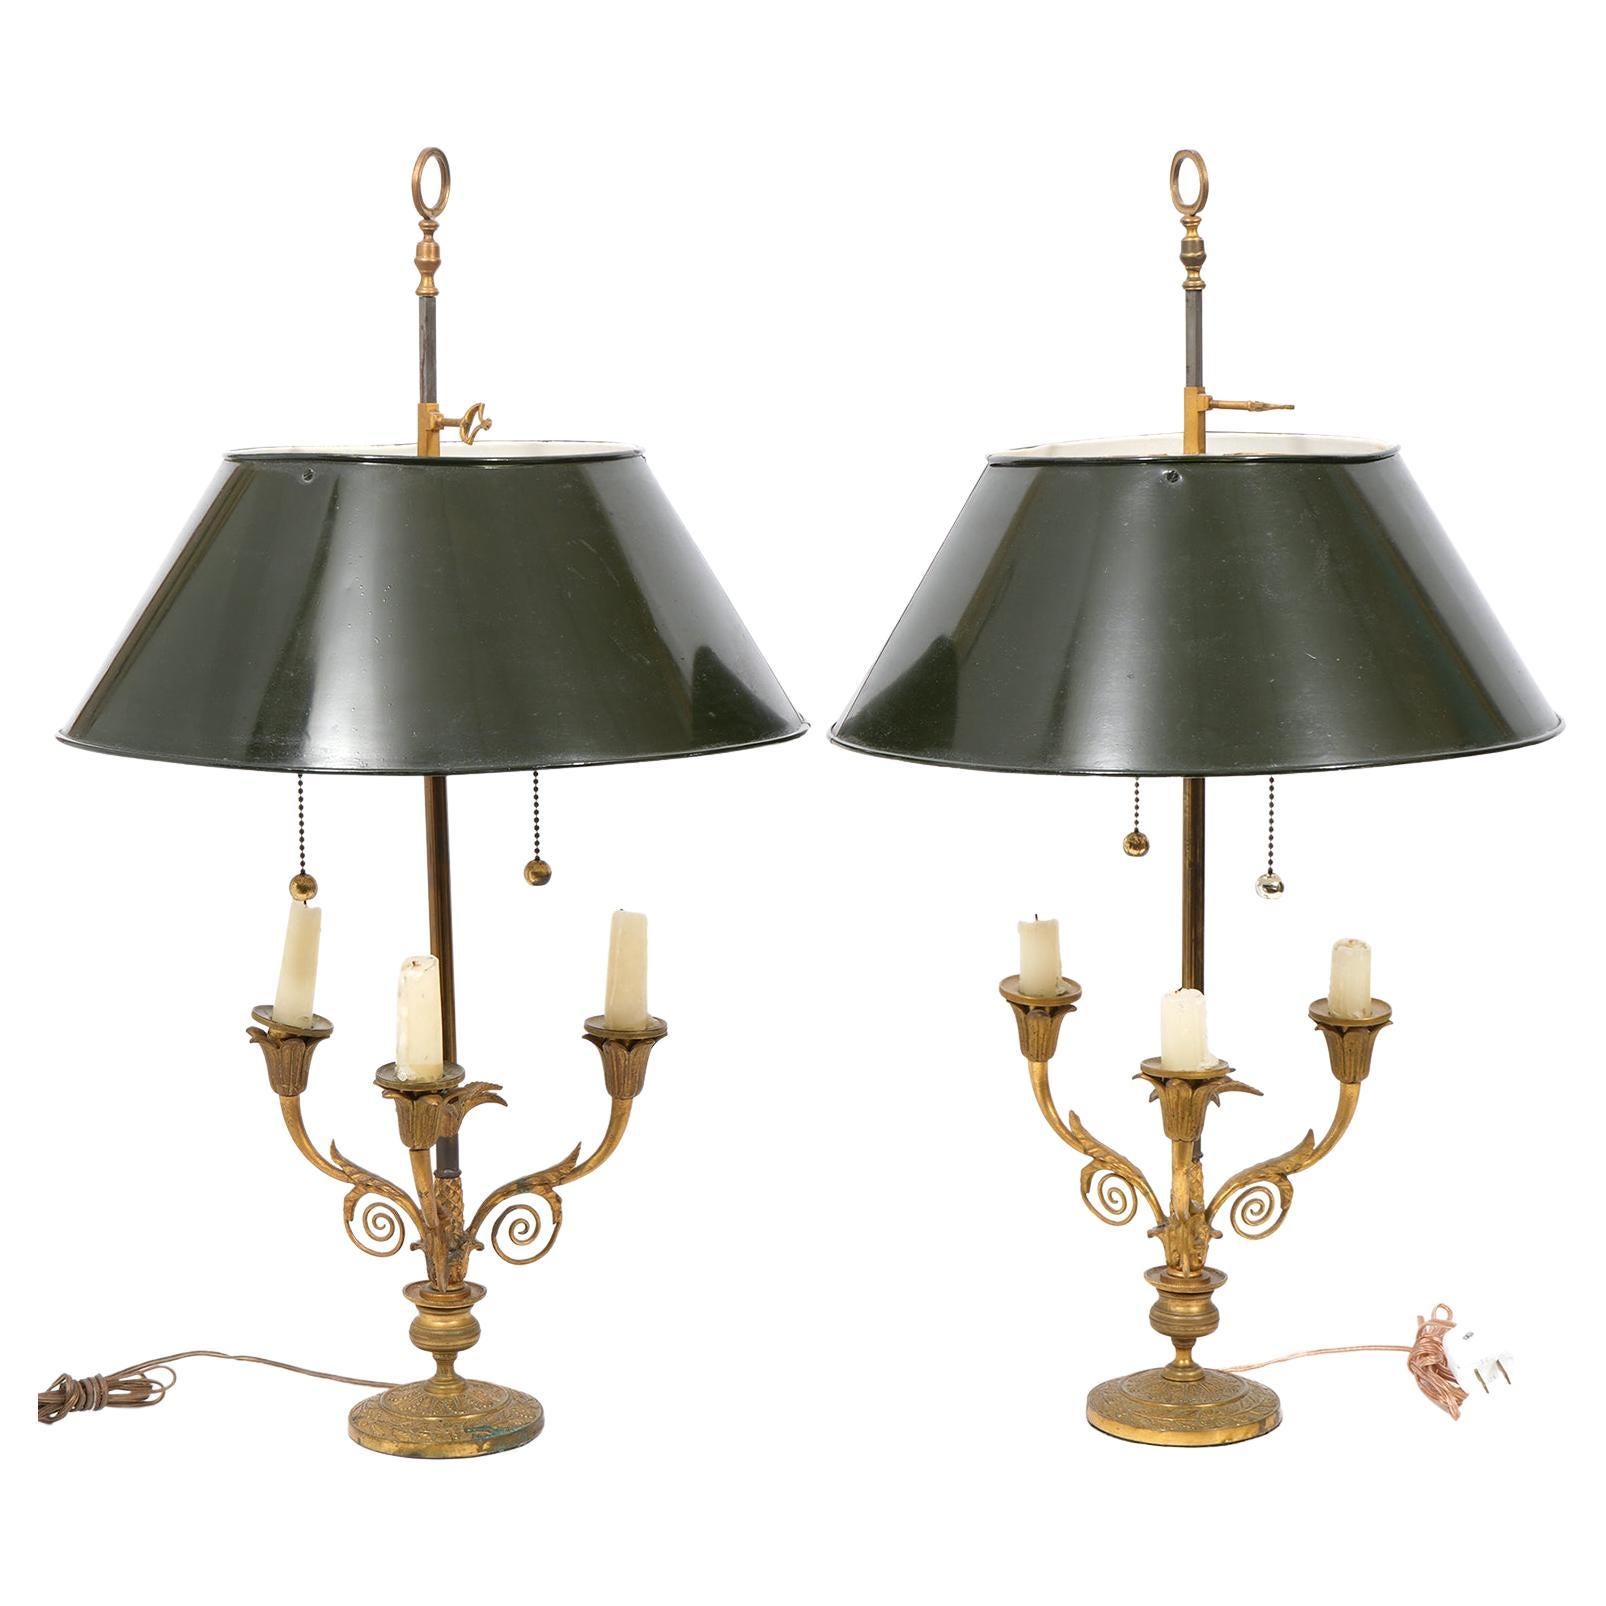 Pair of Early 20th Ct. French Bronze Lamps with Adjustable Tole Painted Shades